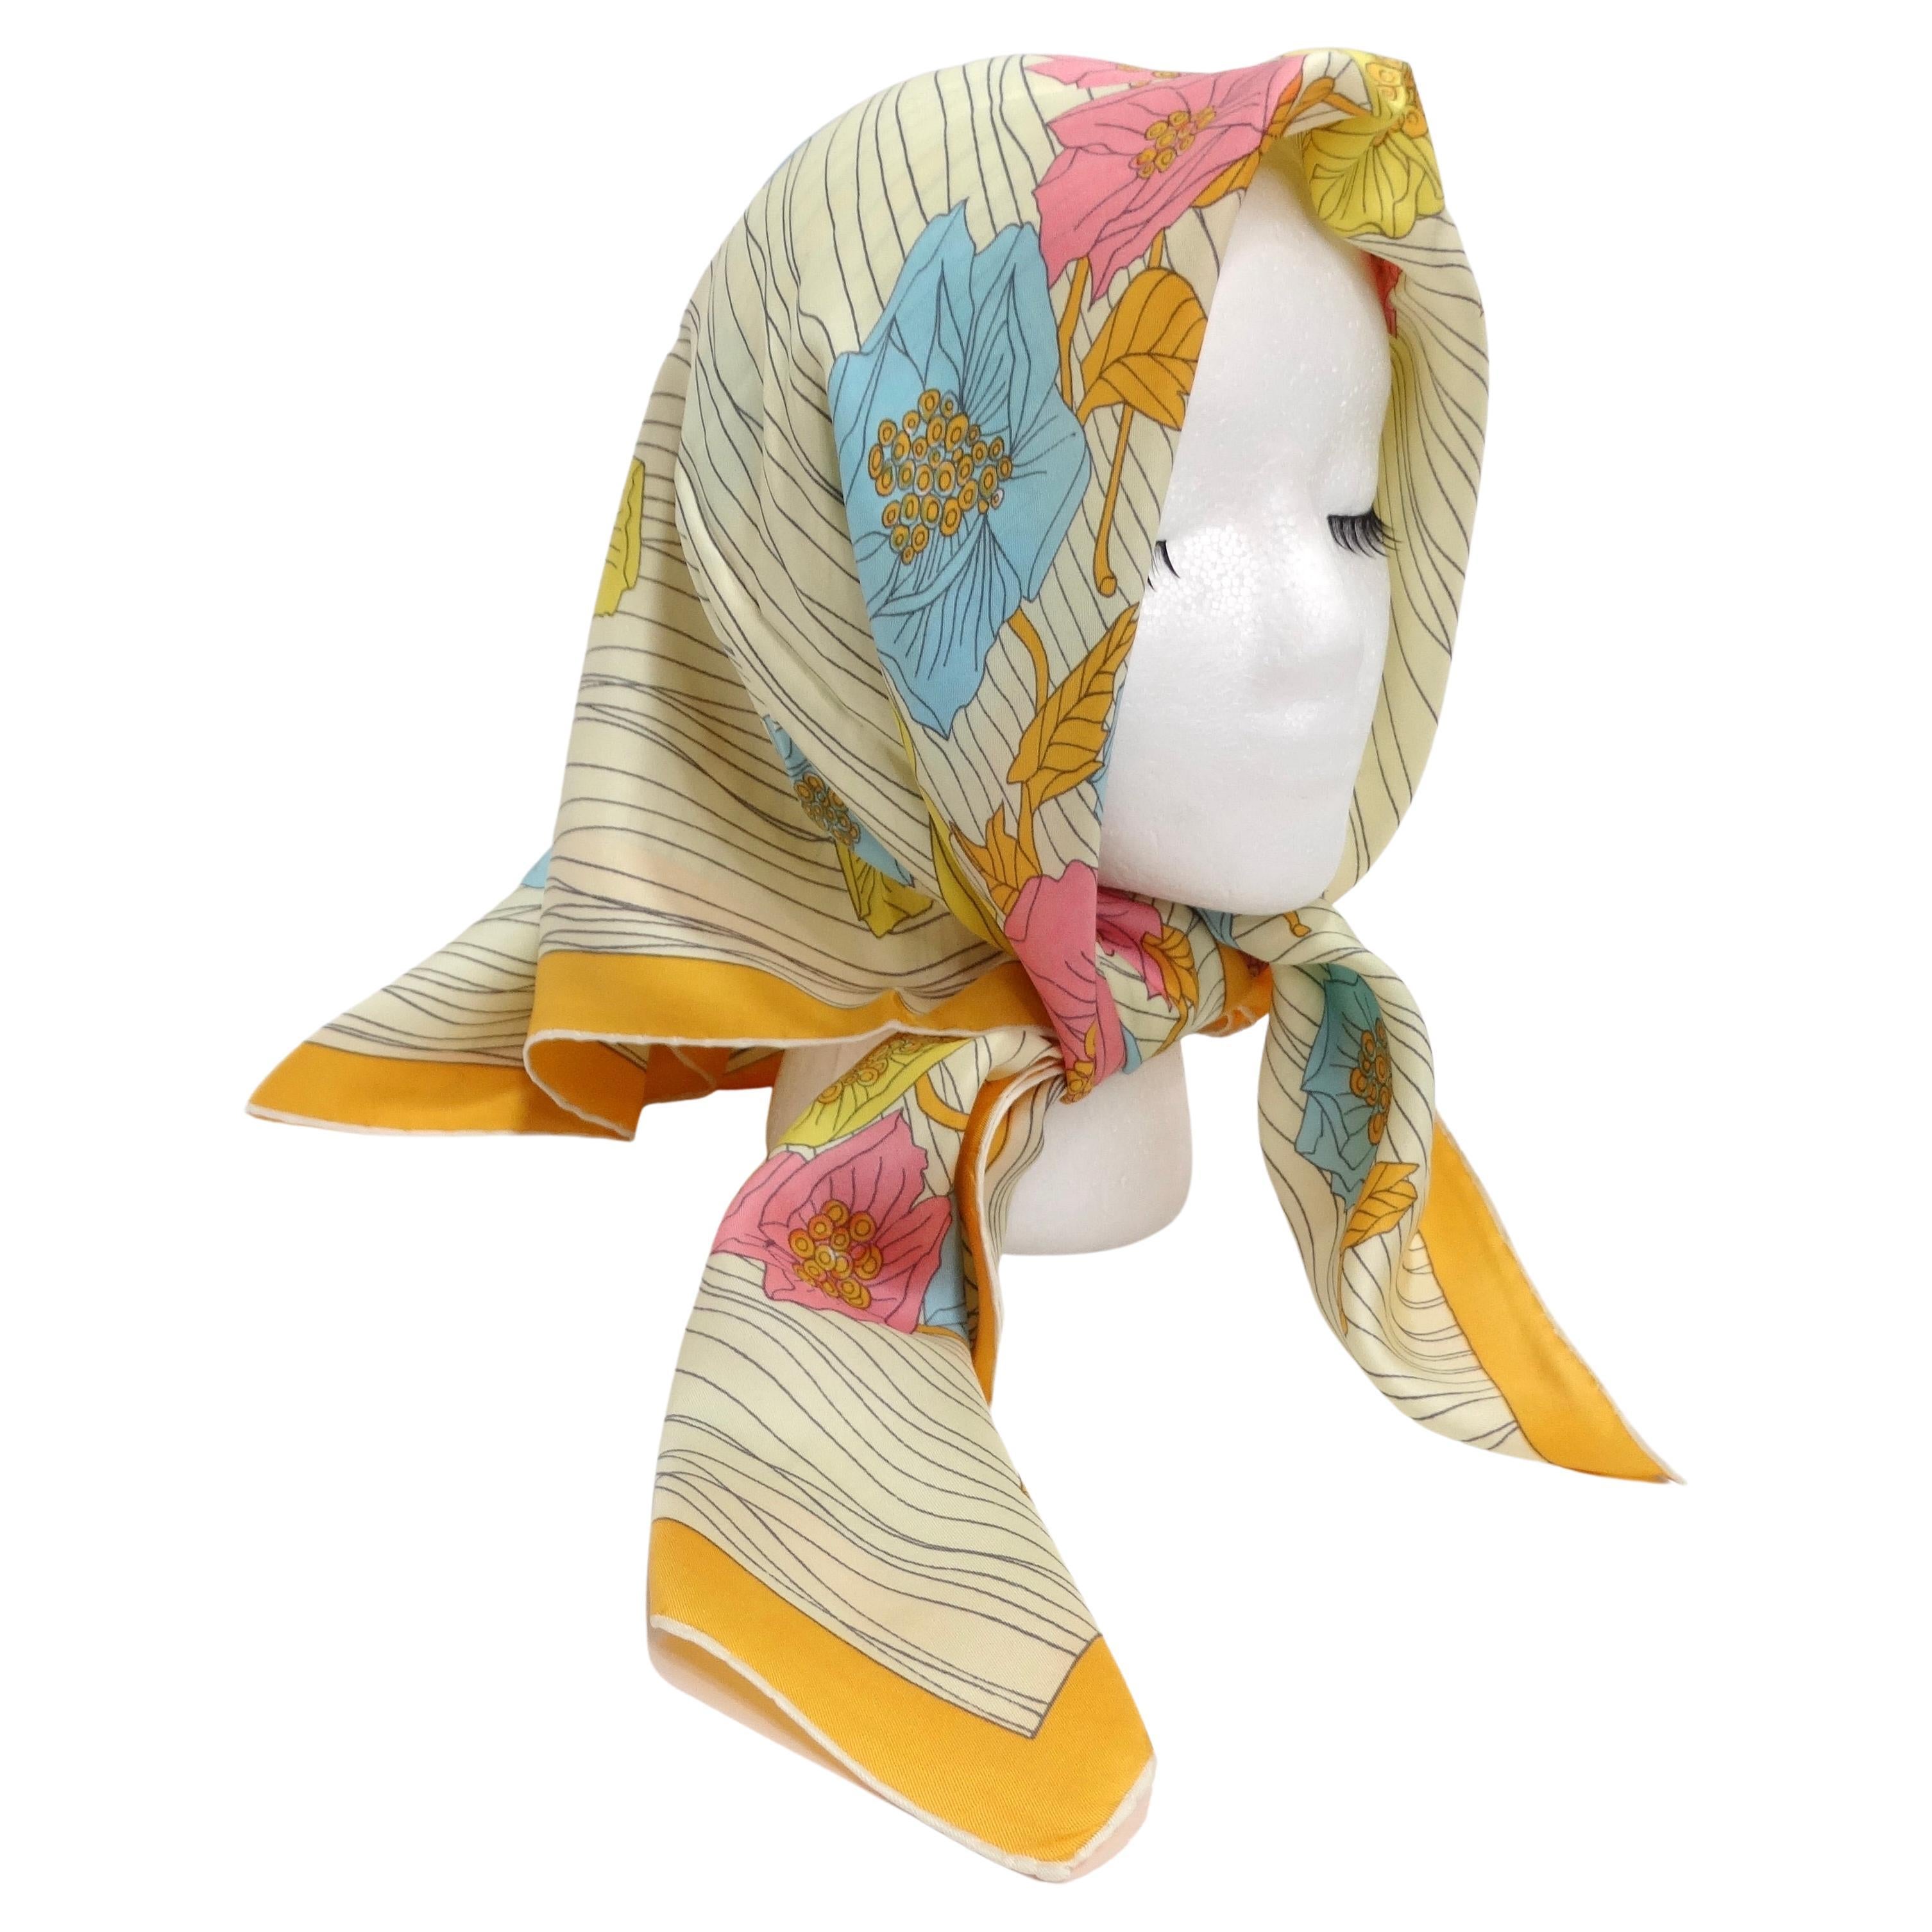 Introducing a timeless piece of artistry: the 1960s Floral Silk Scarf. This exquisite accessory captures the essence of vintage charm while offering endless possibilities for contemporary styling. Warm and vibrant shades merge to form intricate